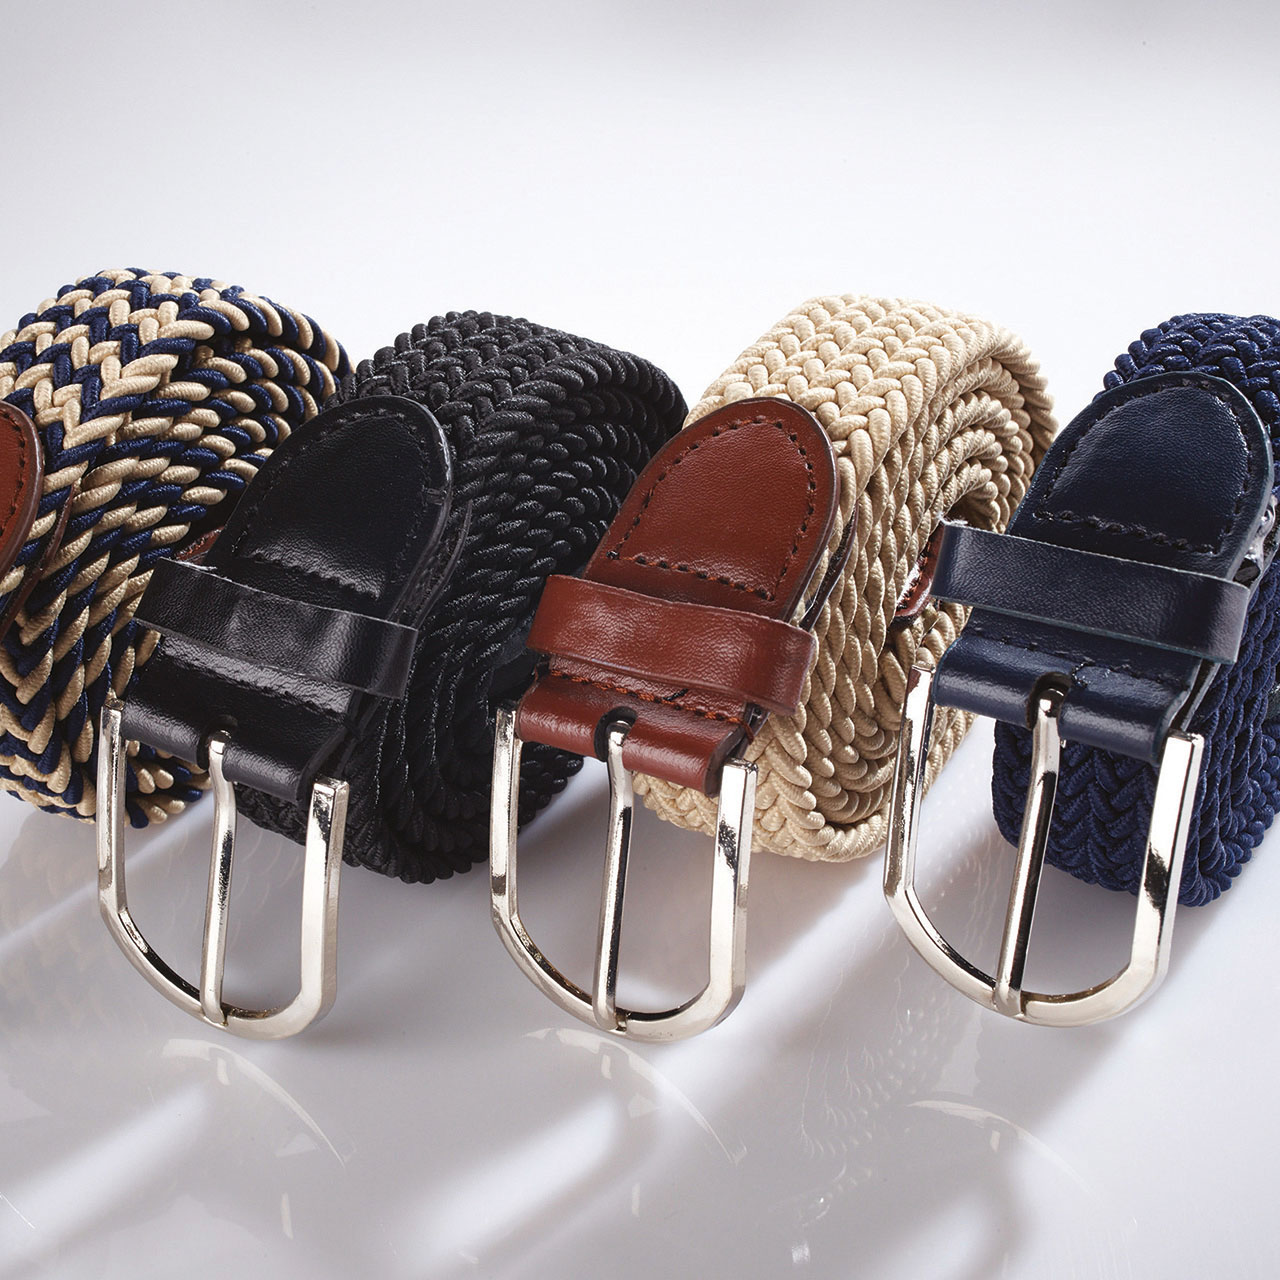 The Bend Two Toned Woven Stretch Belt